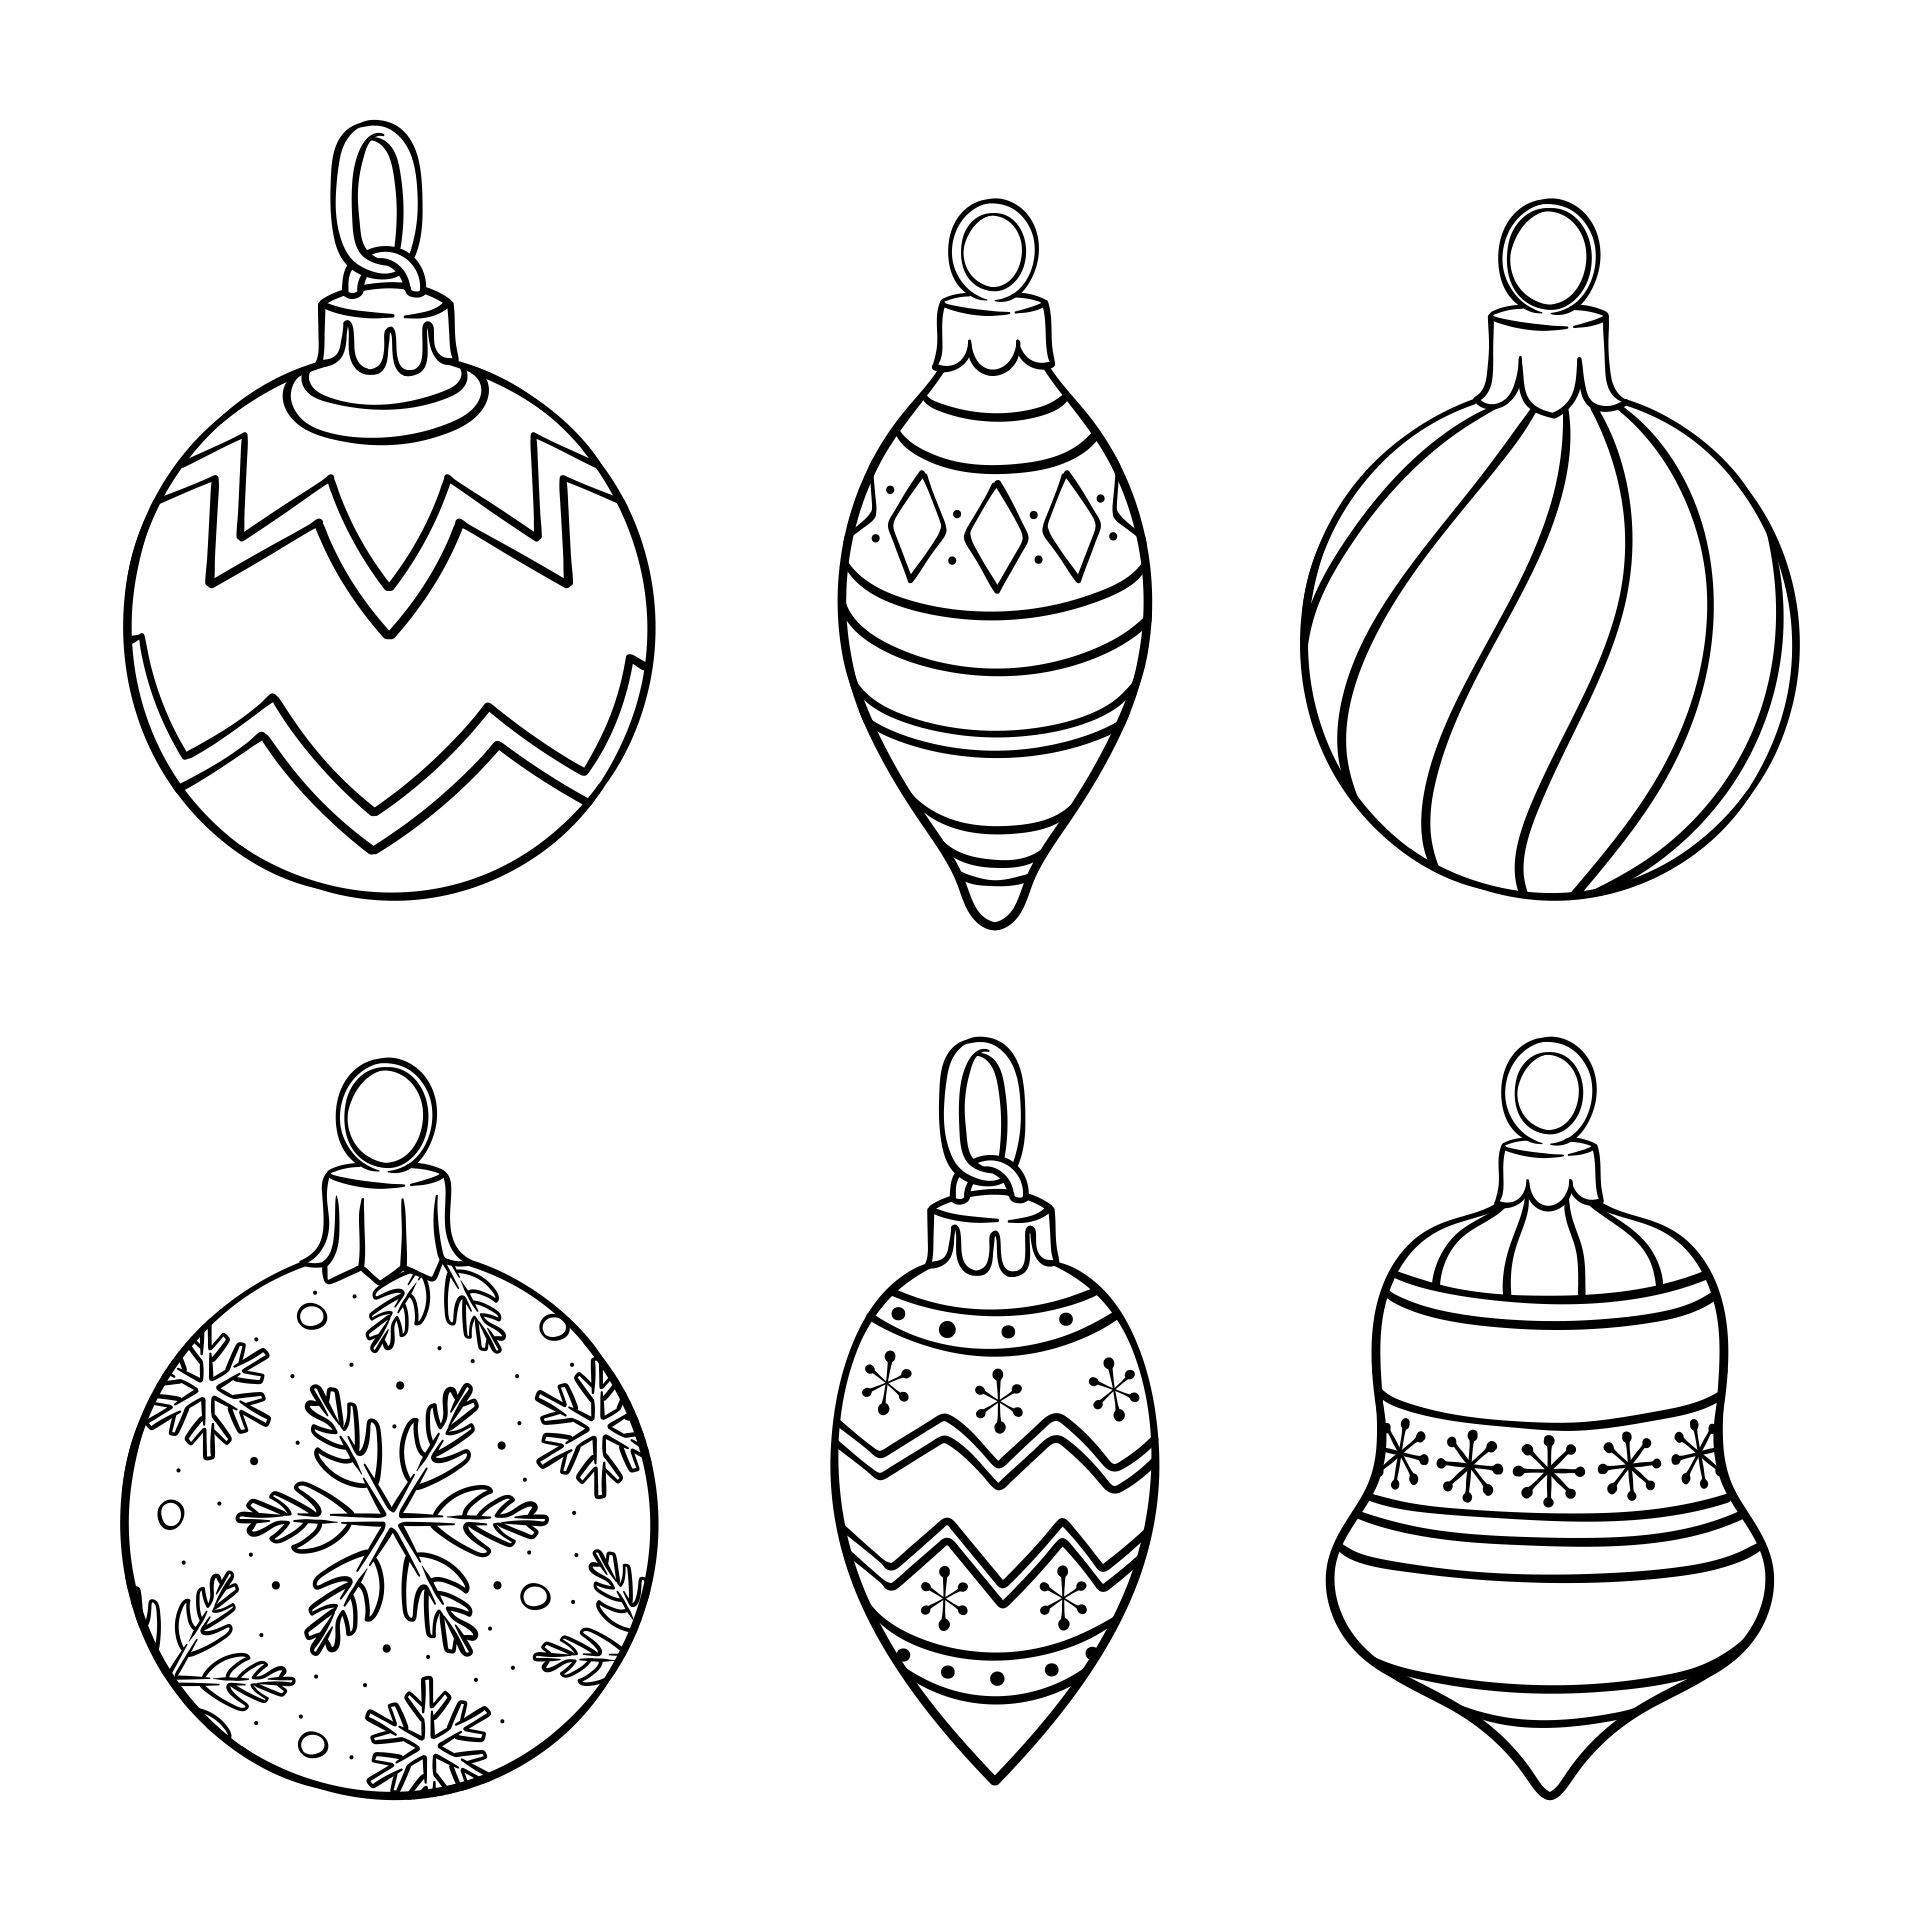 Printable Paper Christmas Decorations Templates